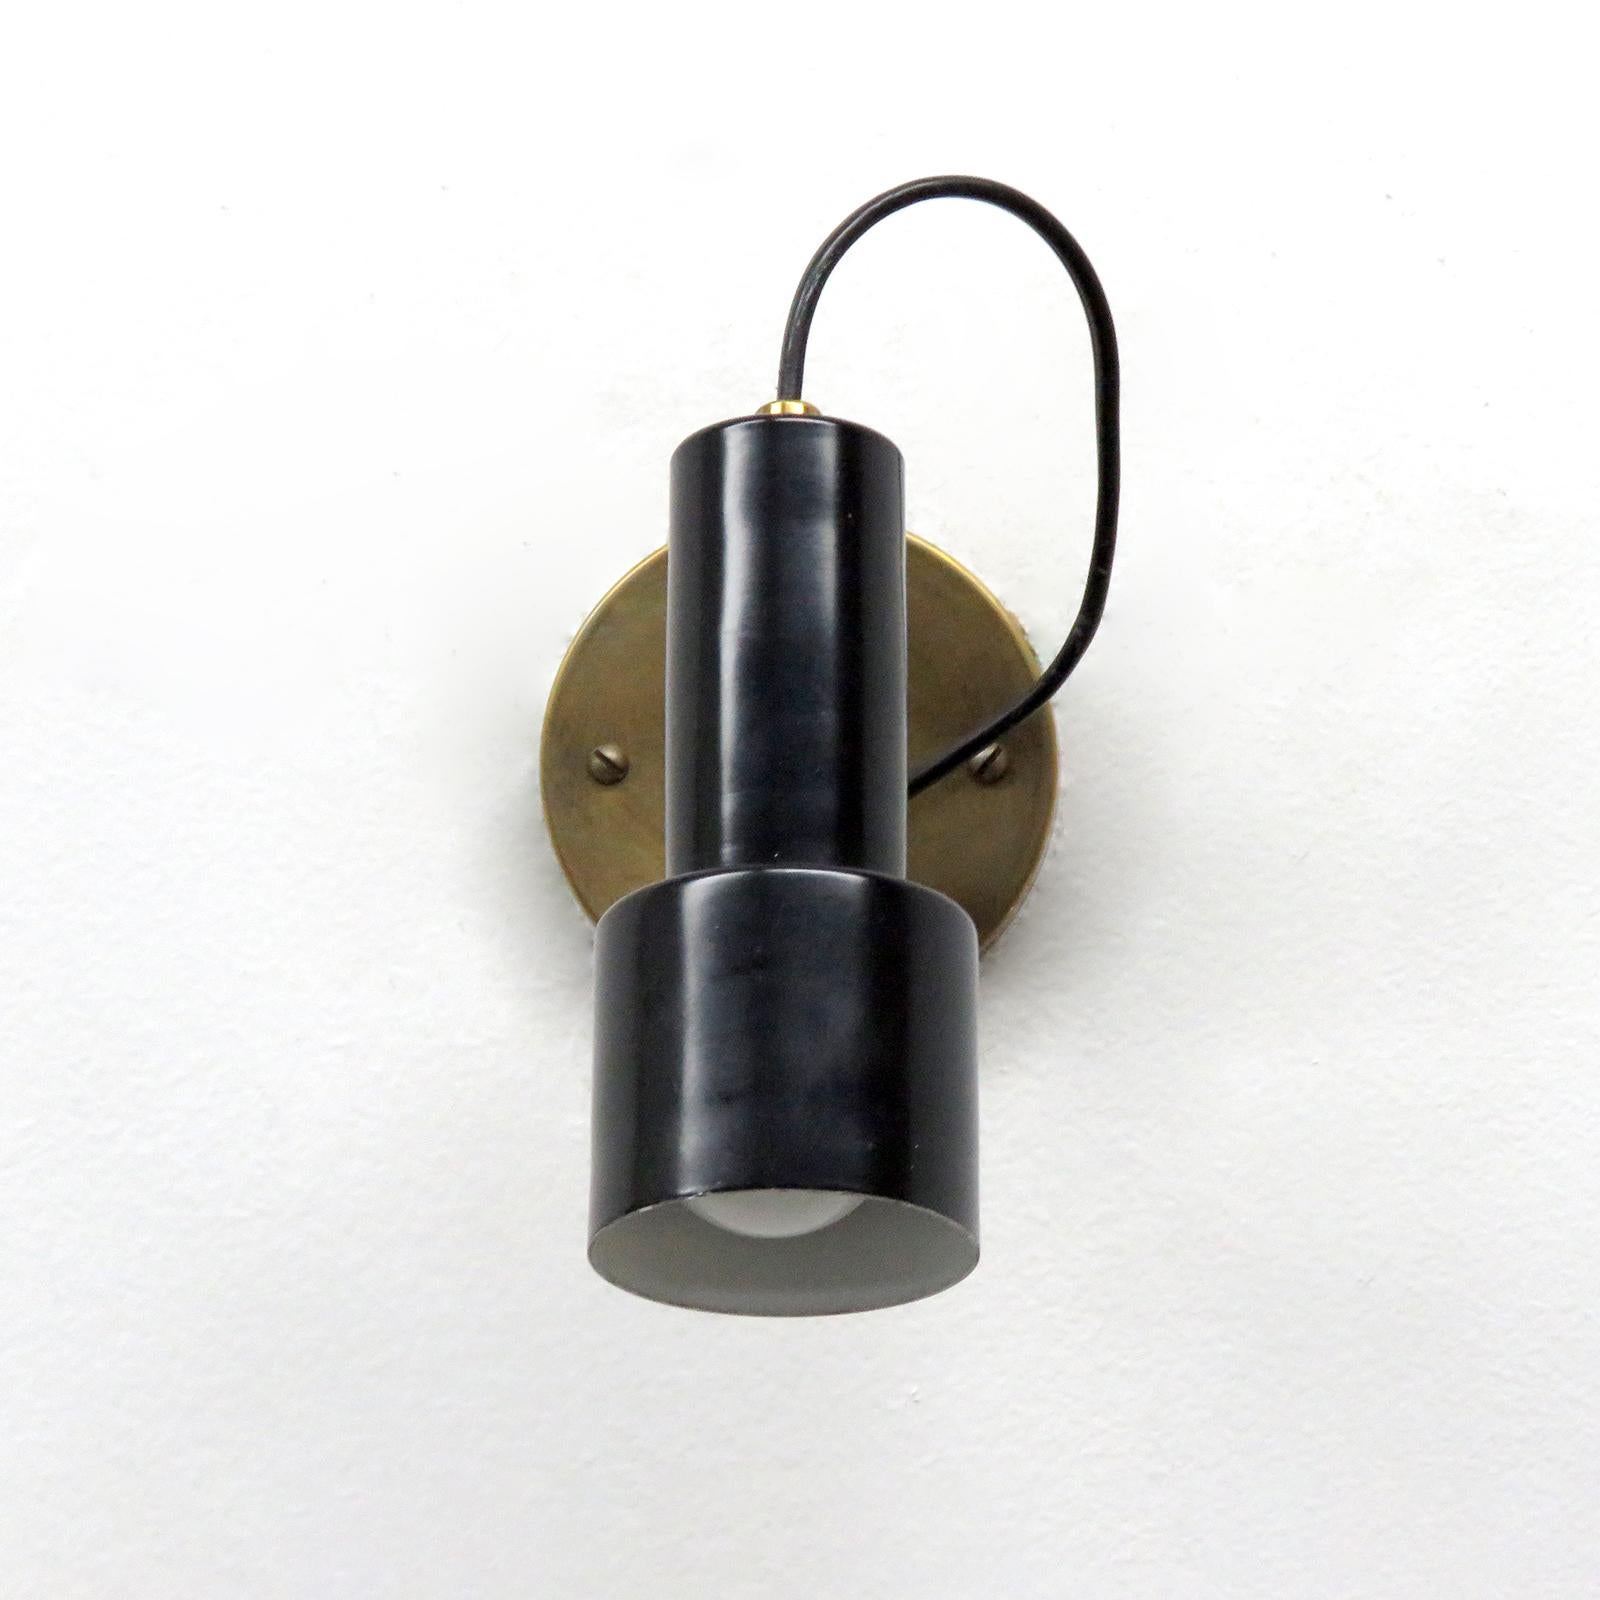 Wonderful pair of articulate wall lights by Giuseppe Ostuni for Oluce, Italy, 1950s, with black enameled bodies on a Dual-joint brass arm.